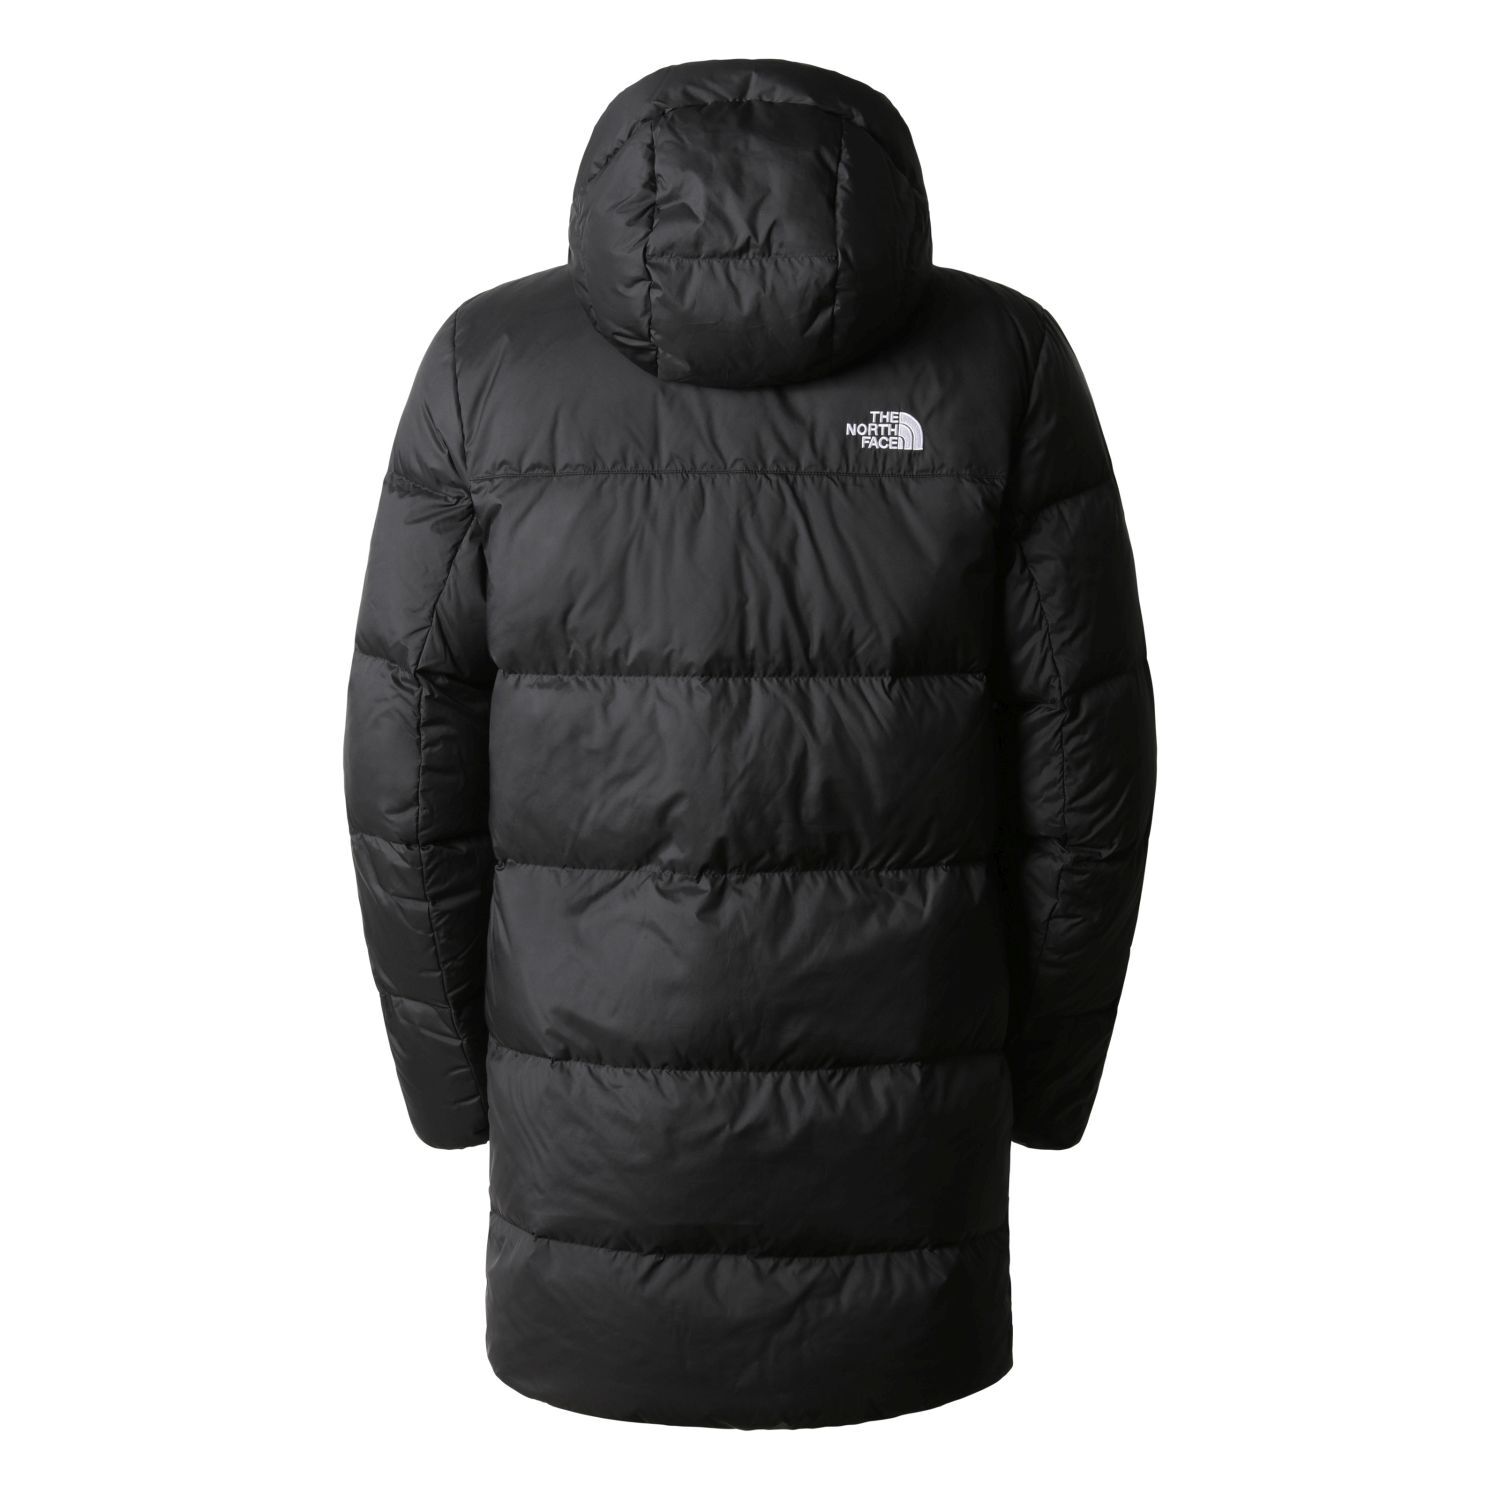 The North Face Hydrenalite online Bobleisure